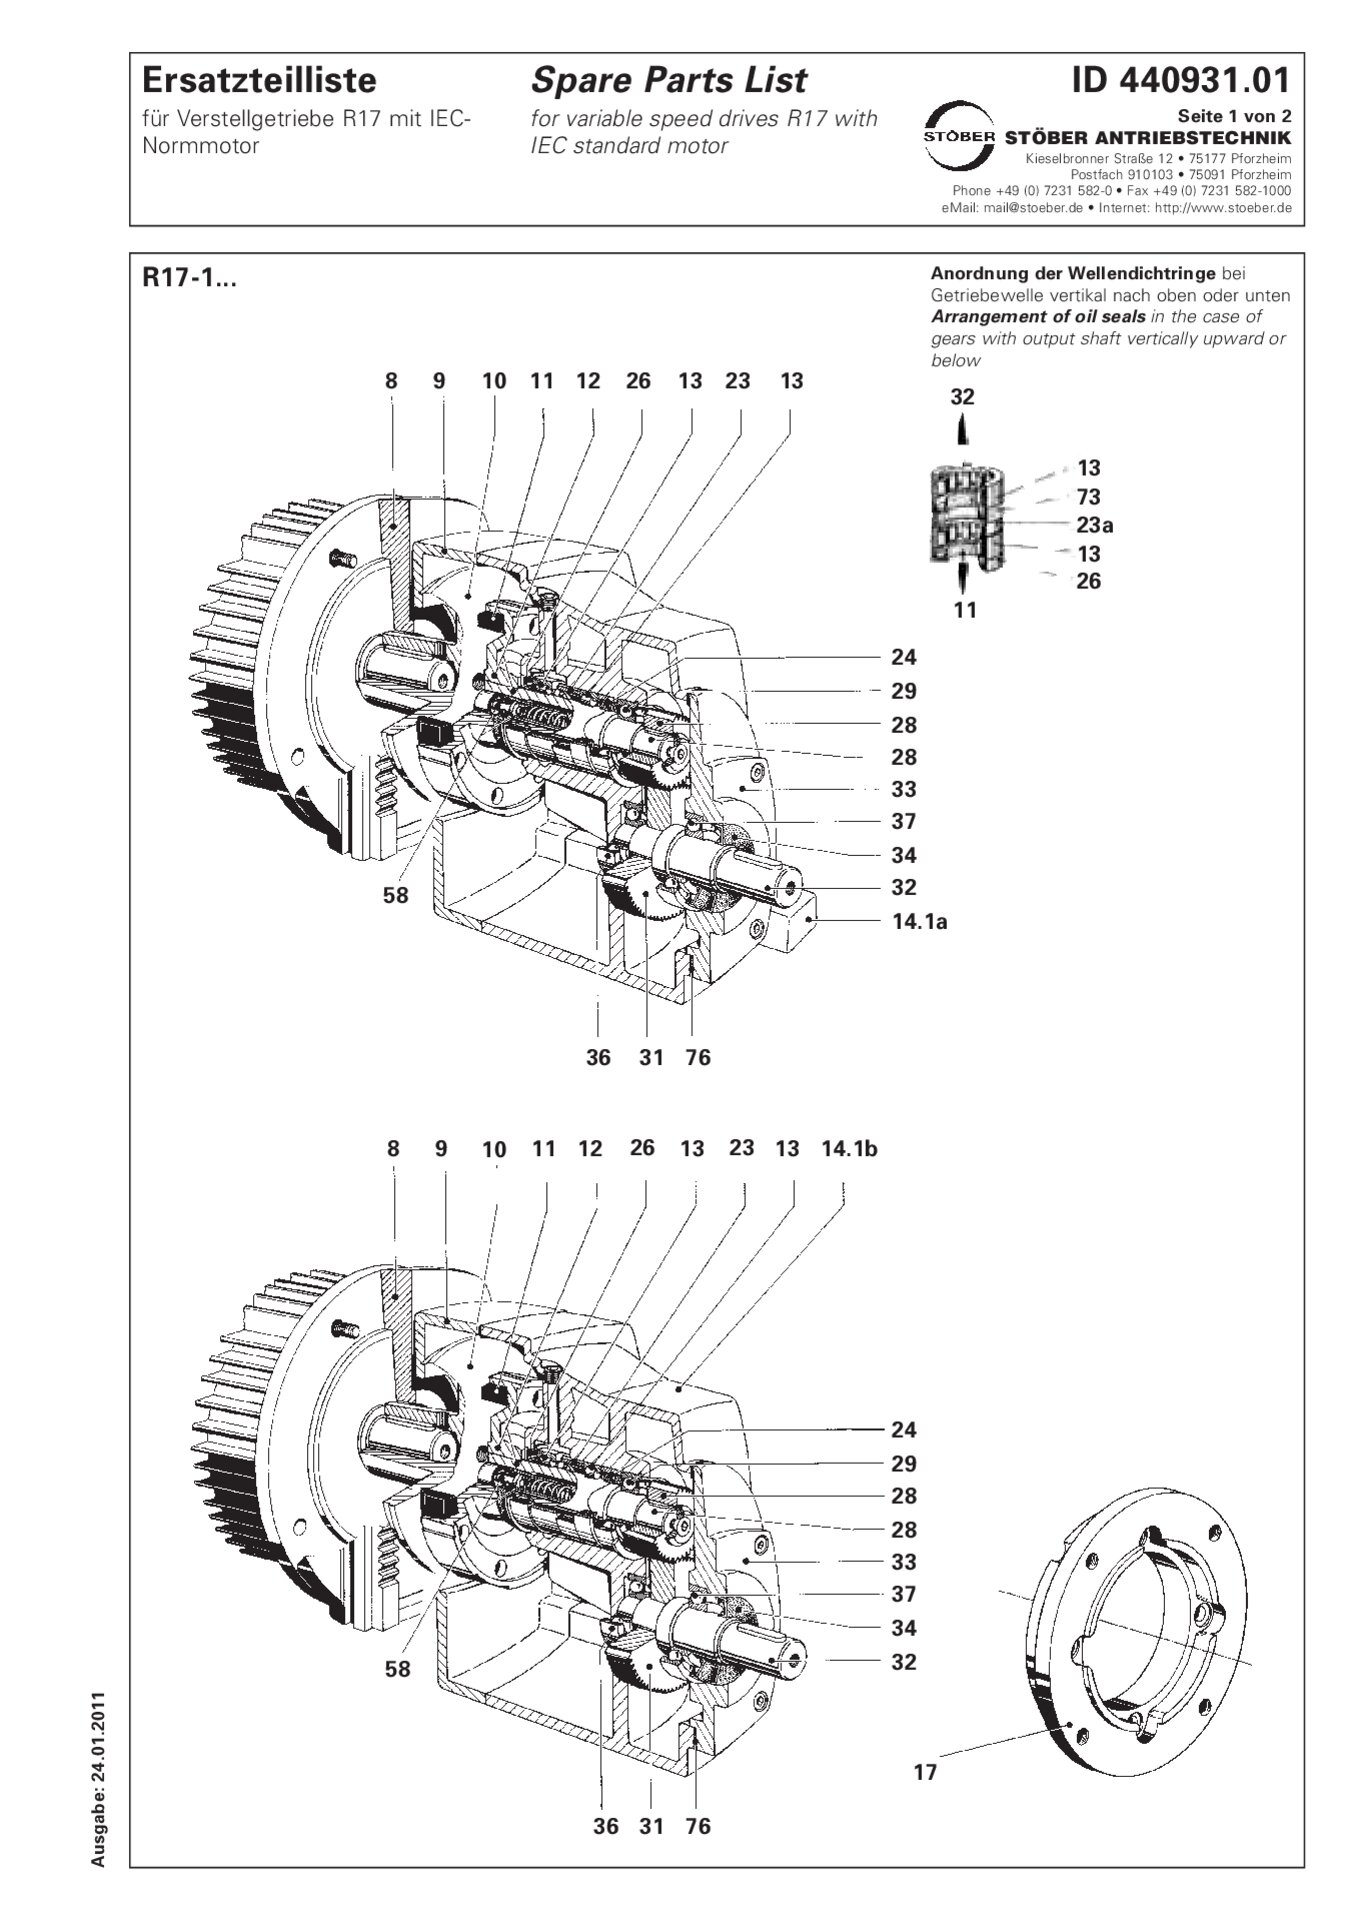 Spare parts list R17-1 with IEC standard motor